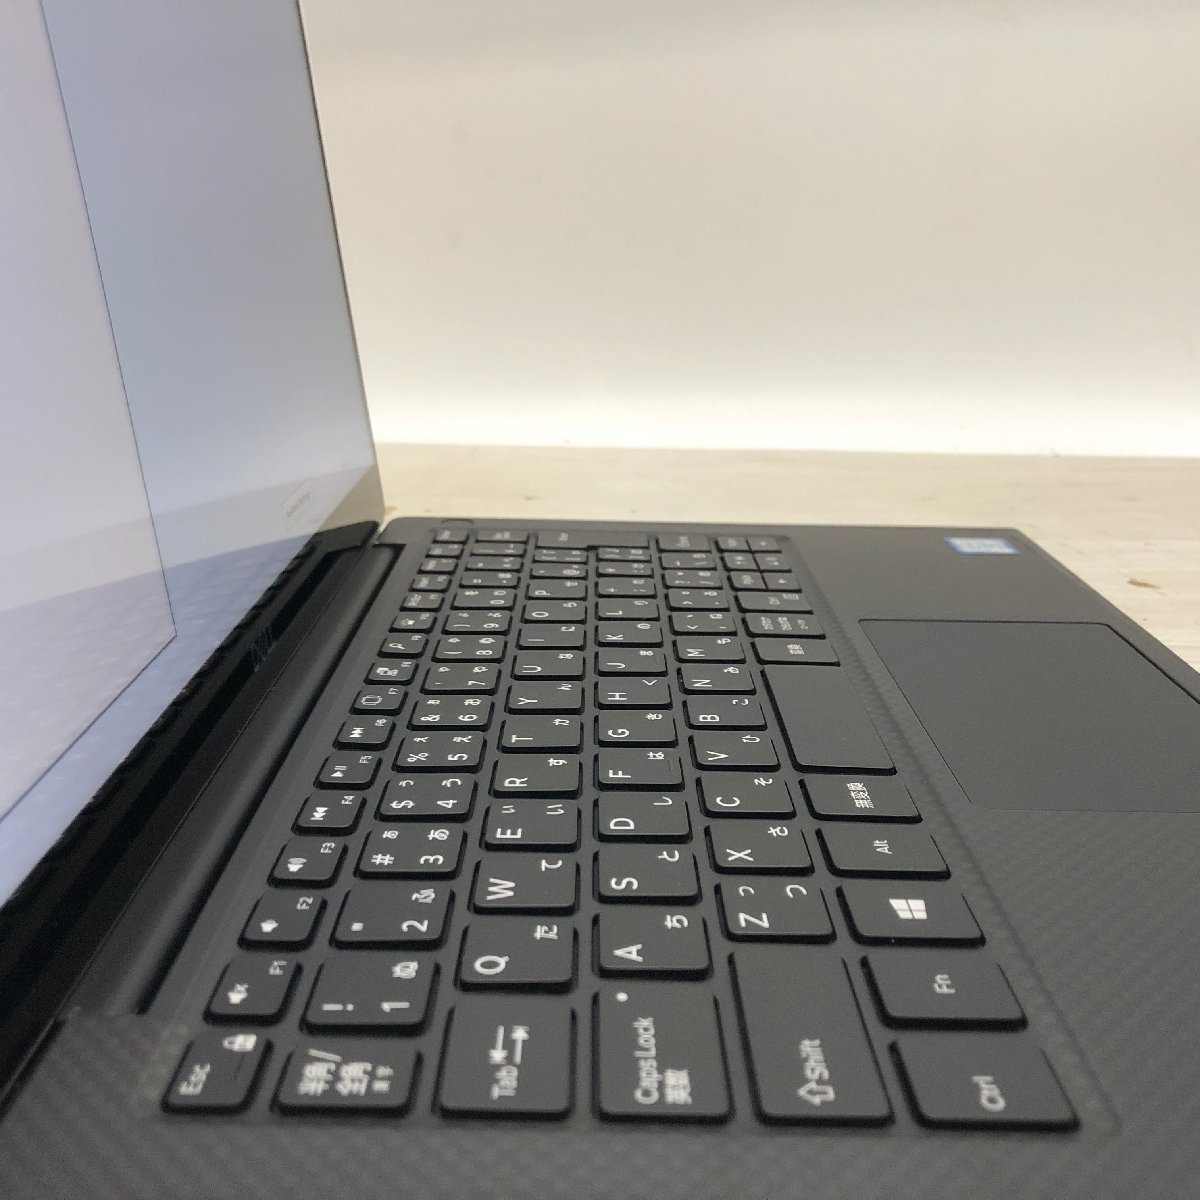 DELL XPS 13 9380 Core i7 8665U 1.90GHz/16GB/なし 〔1115N40〕_画像4